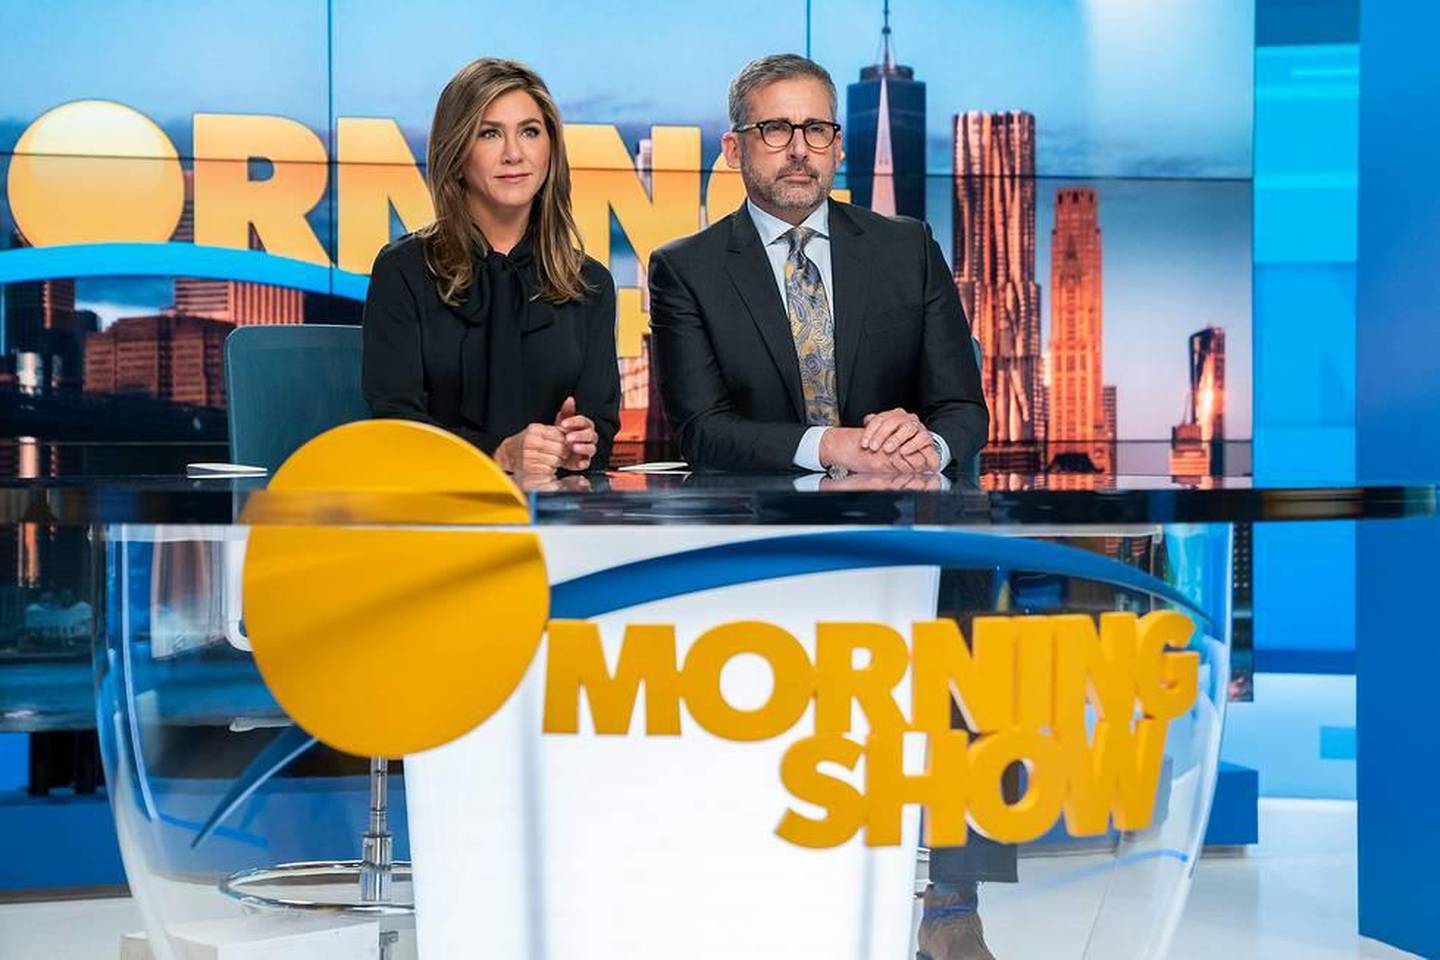 Steve Carrel and Jennifer Aniston in 'The Morning Show'. Courtesy Apple